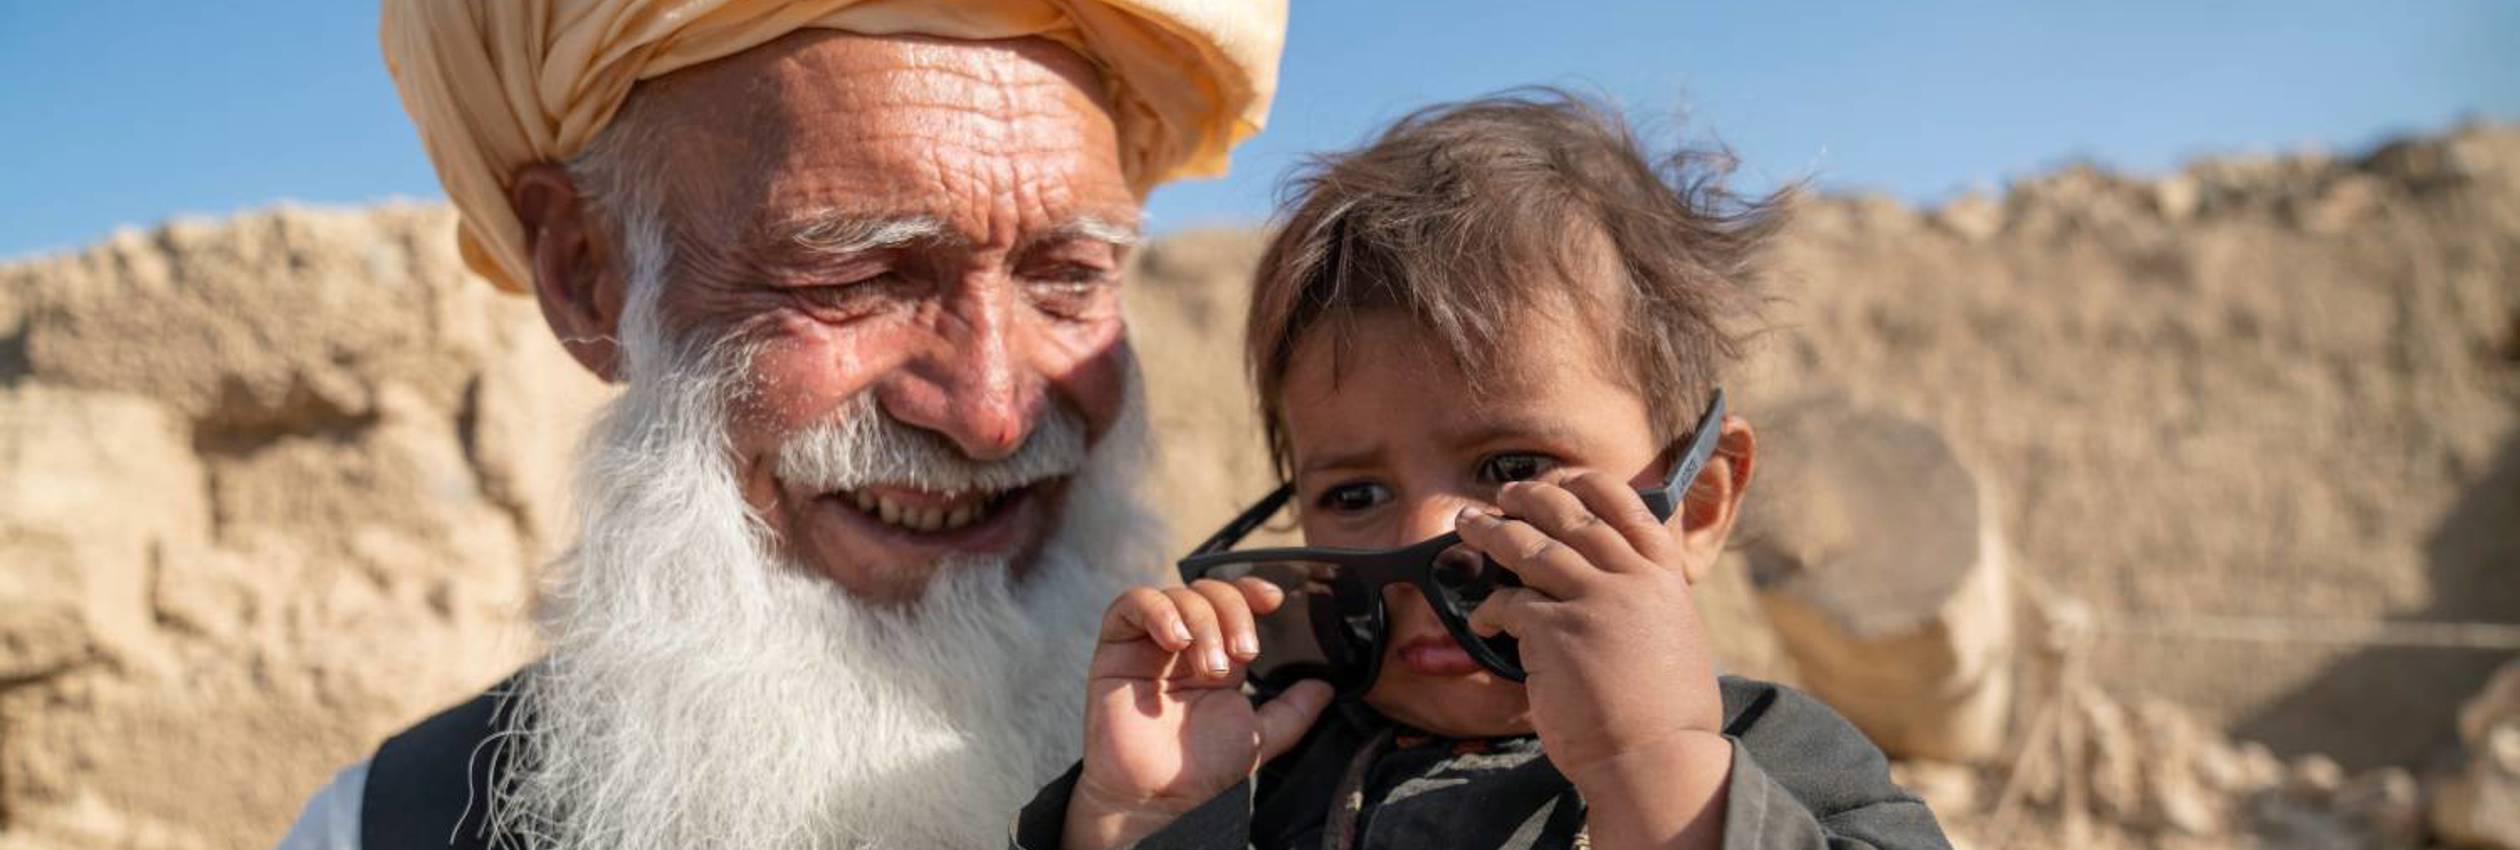 A boy puts on sunglasses while his grandfather holds him, smiling. In Afghanistan, UNHCR is providing earthquake-resilient houses for displaced families.